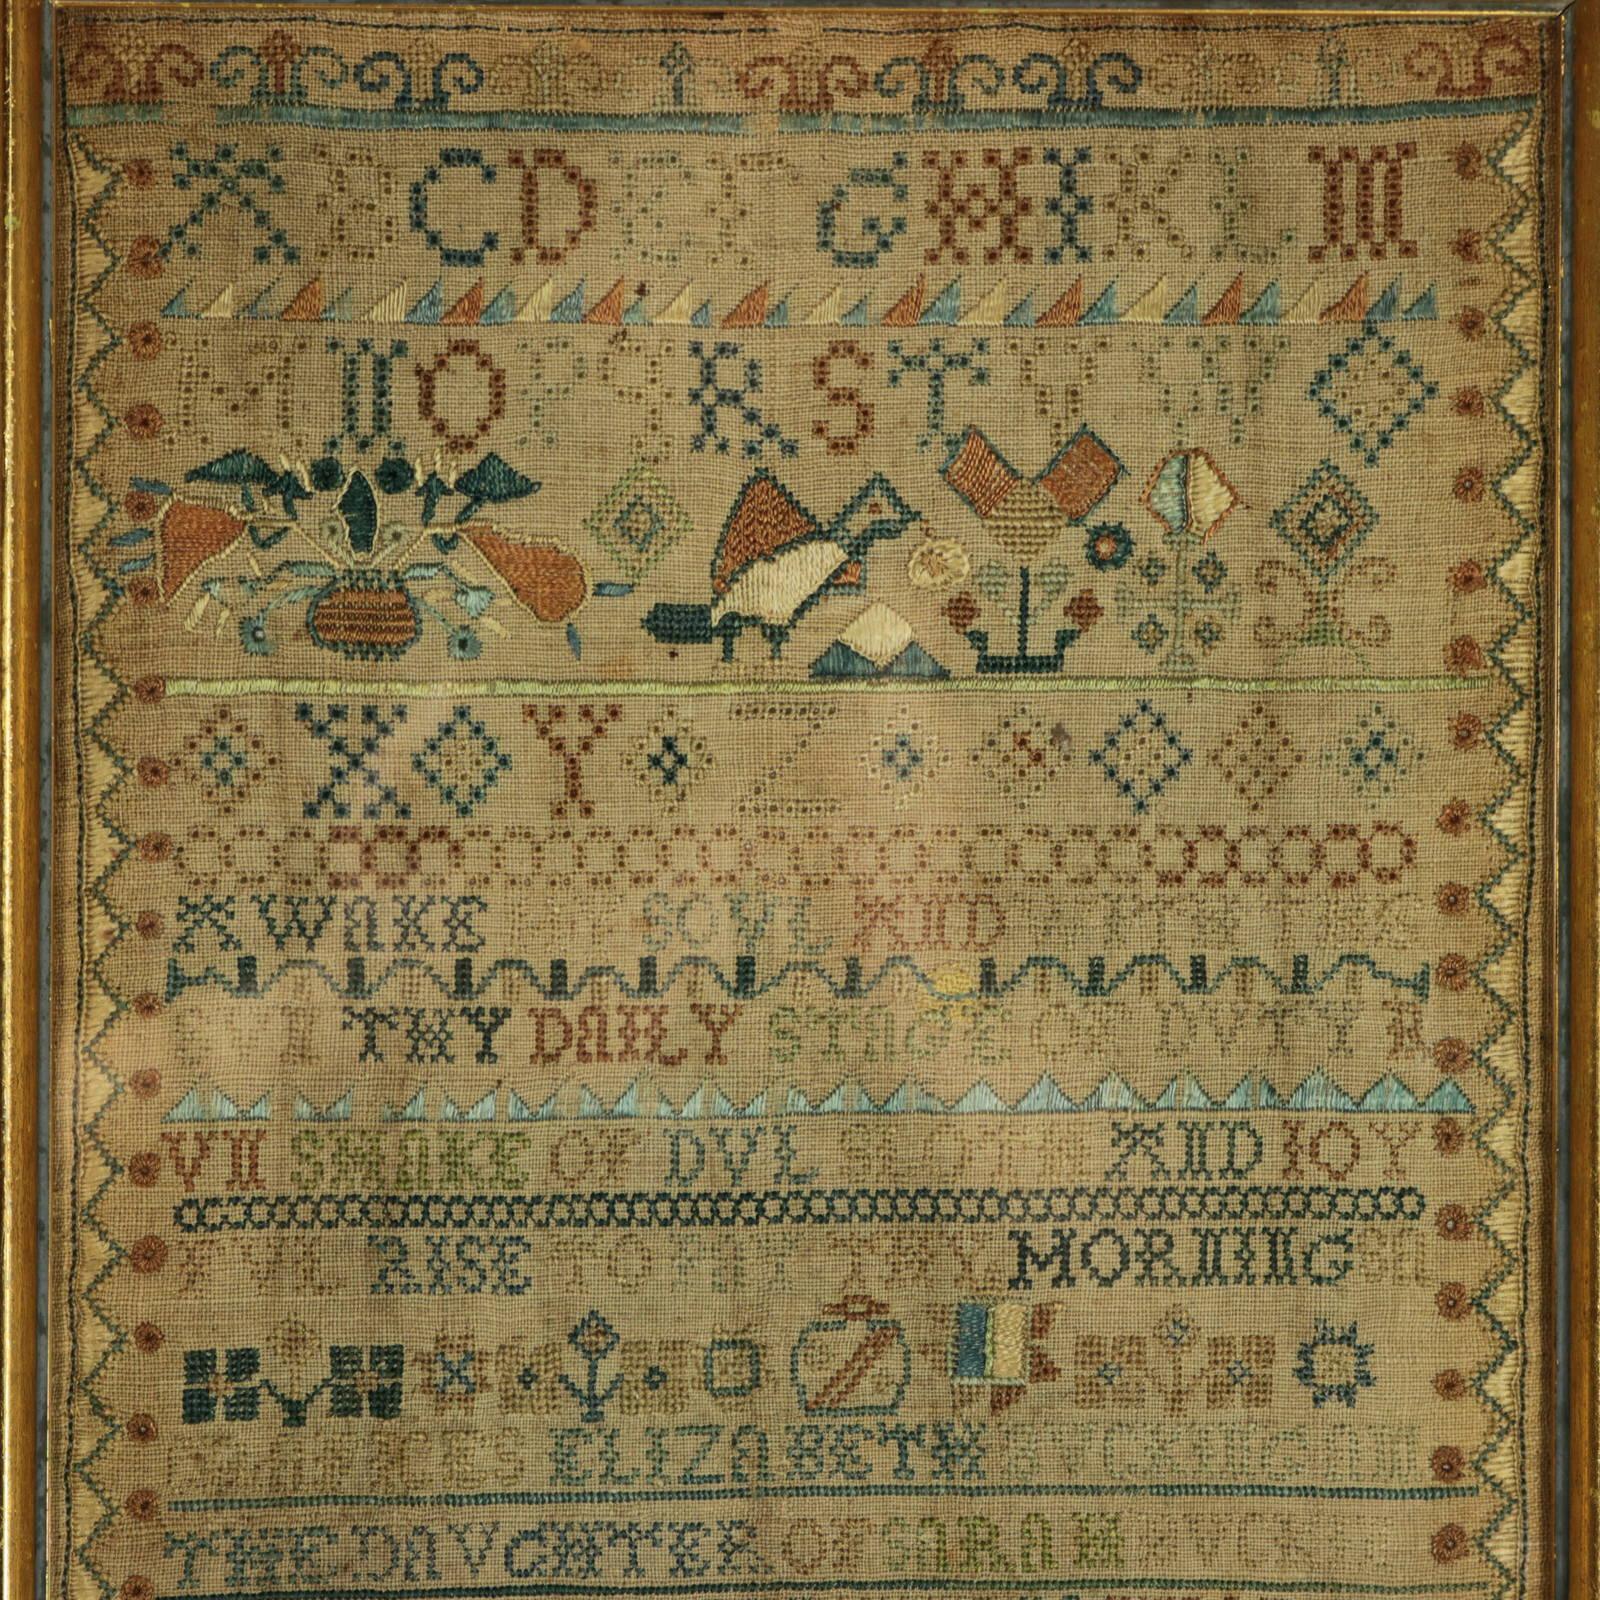 1741 Band Sampler by Elizabeth Buckingam. The sampler is worked in silk and linen ground, in a variety of stitches including Algerian eye. Decorated border and divider lines in various patterns. Colours gold, green, light brown, dark brown, purple,